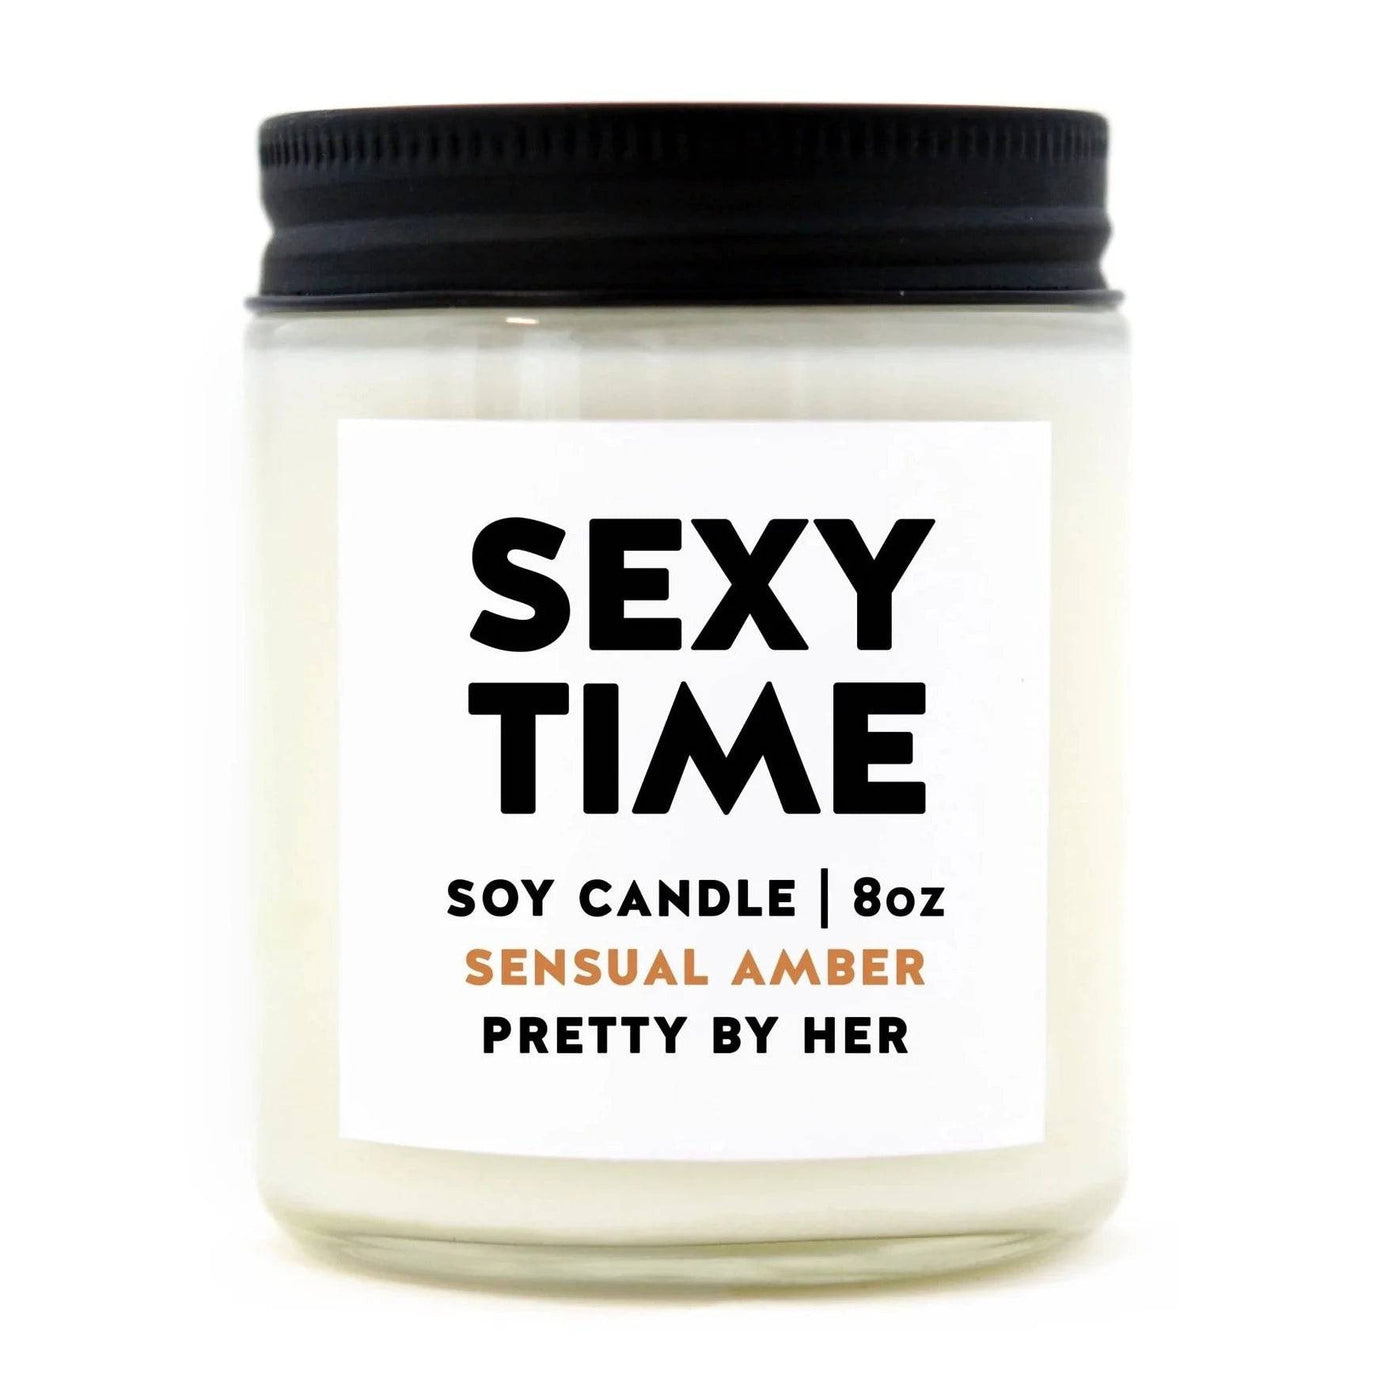 Sexy Time | Soy Candle - The Local Space